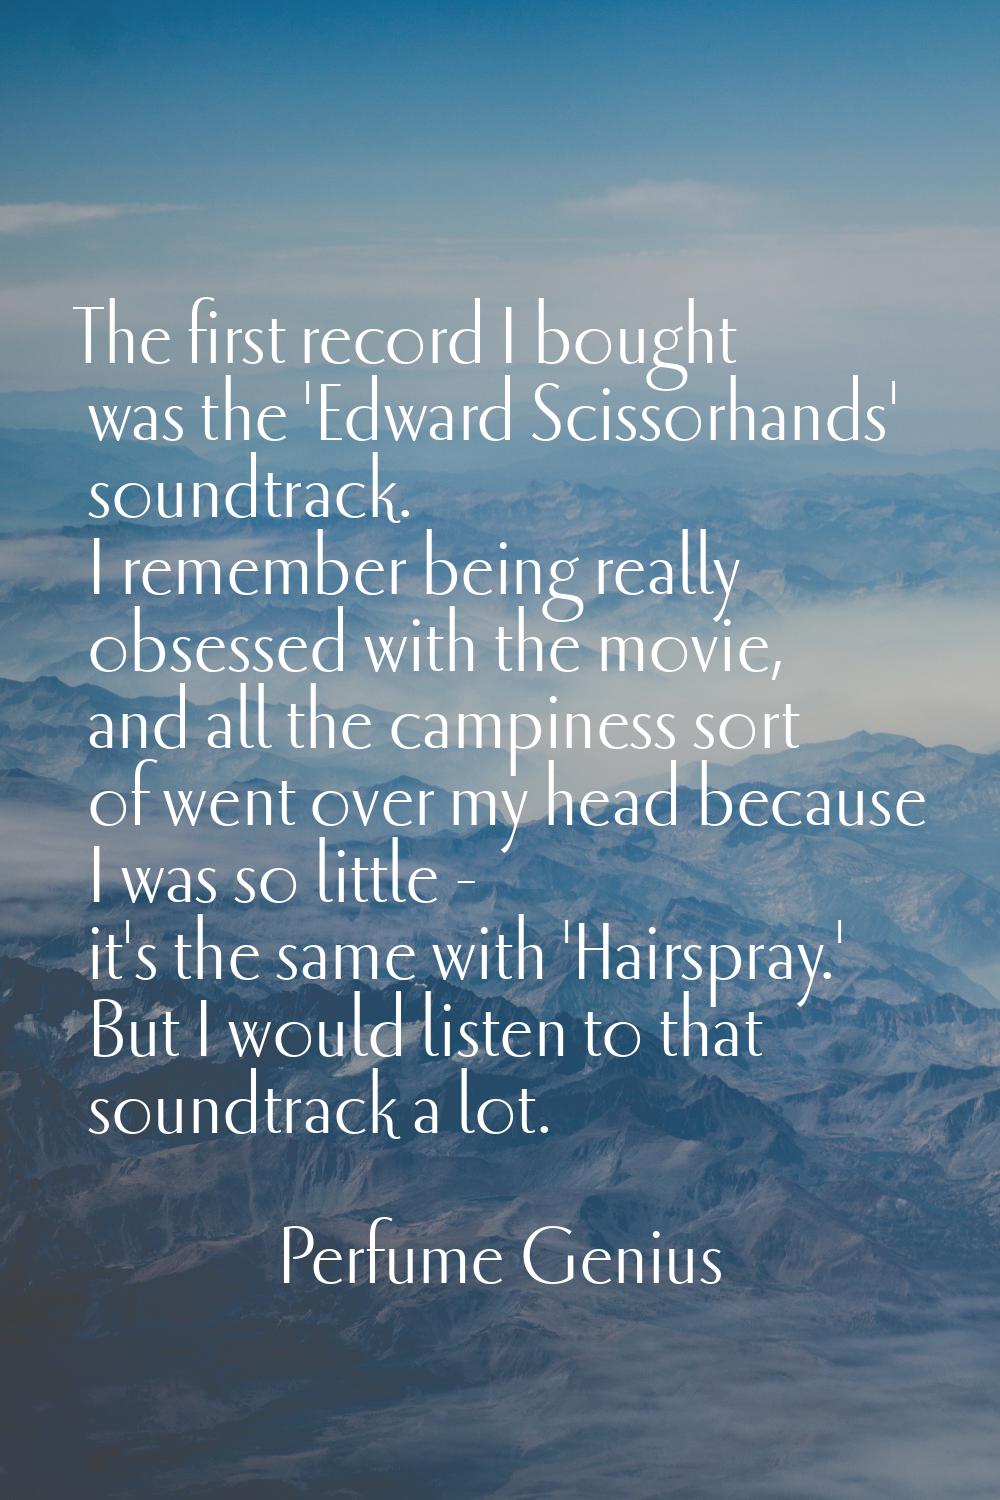 The first record I bought was the 'Edward Scissorhands' soundtrack. I remember being really obsesse